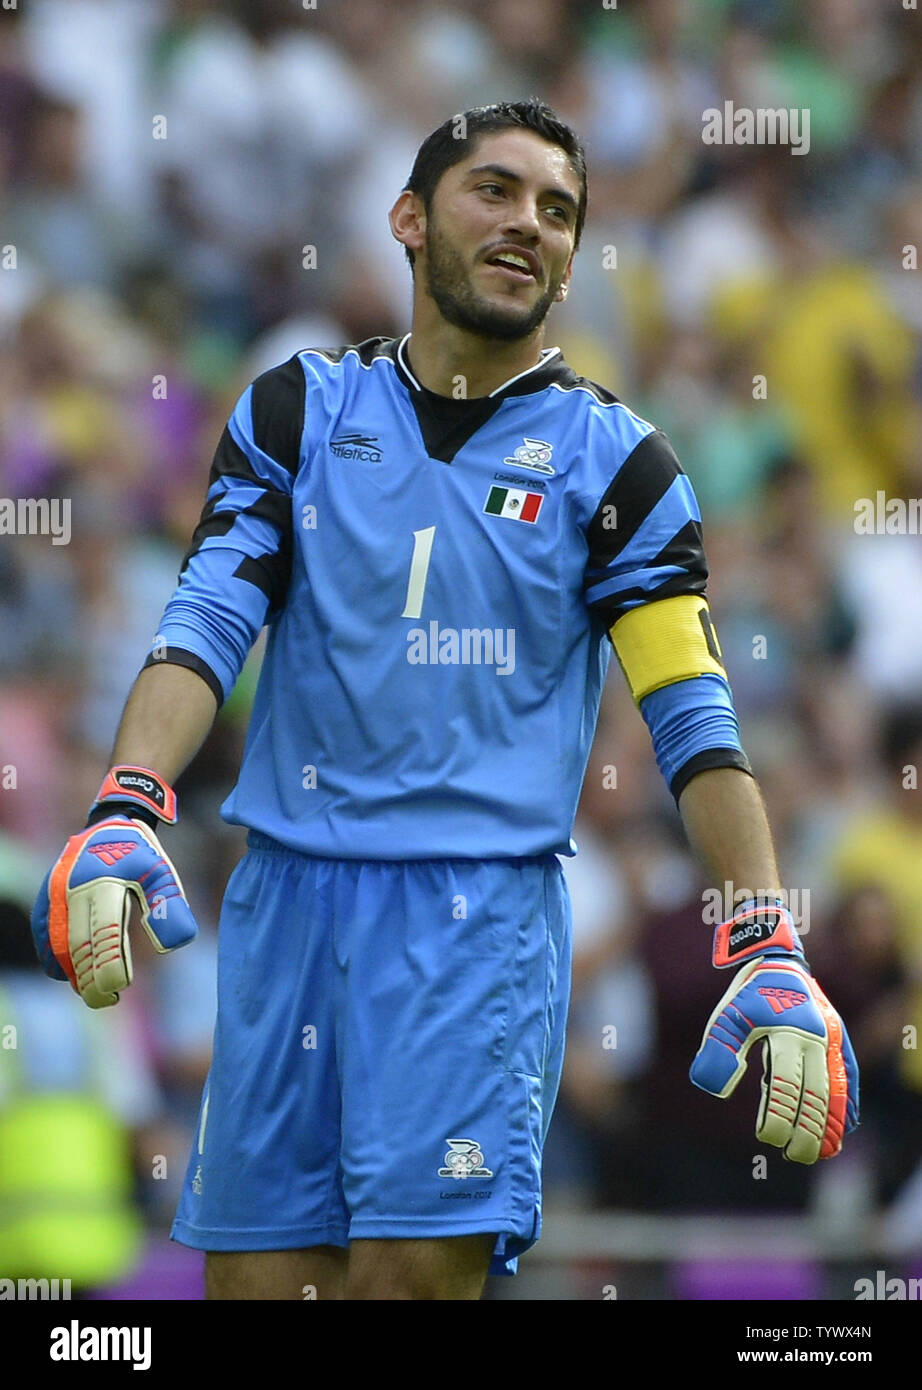 goalkeeper Jose Corona of Mexico smiles after defeating Brazil in the Gold Medal Football Match at the London 2012 Summer Olympics on August 11, 2012 at Wembley Stadium, London. Mexico defeated Brazil 2-1 to win the Gold Medal.      UPI/Brian Kersey Stock Photo